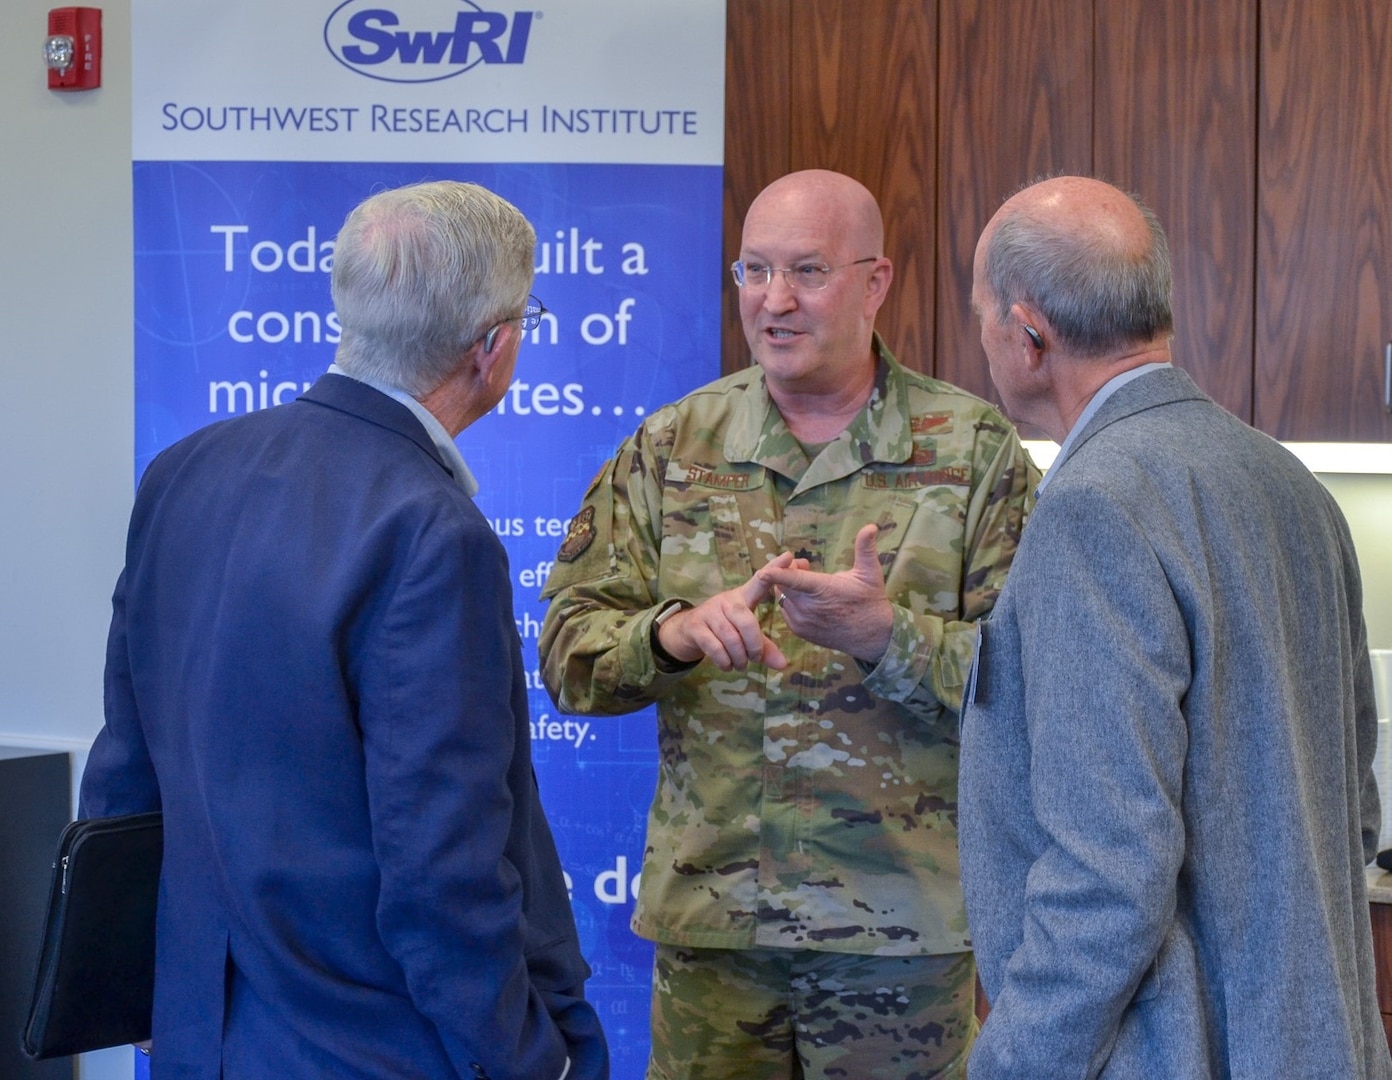 Lt. Col. Eddie K. Stamper (center), Joint Base San Antonio-Electromagnetic Defense Initiative project officer, speaks with J.O. McFalls, McFalls Associates LLC, and Klaus Weiswurm, Innovation Technology Machinery chairman and an appointee to the U.S. Air Force Civic Leader Program, before the quarterly San Antonio Electromagnetic Defense meeting at Southwest Research Center Nov. 18.